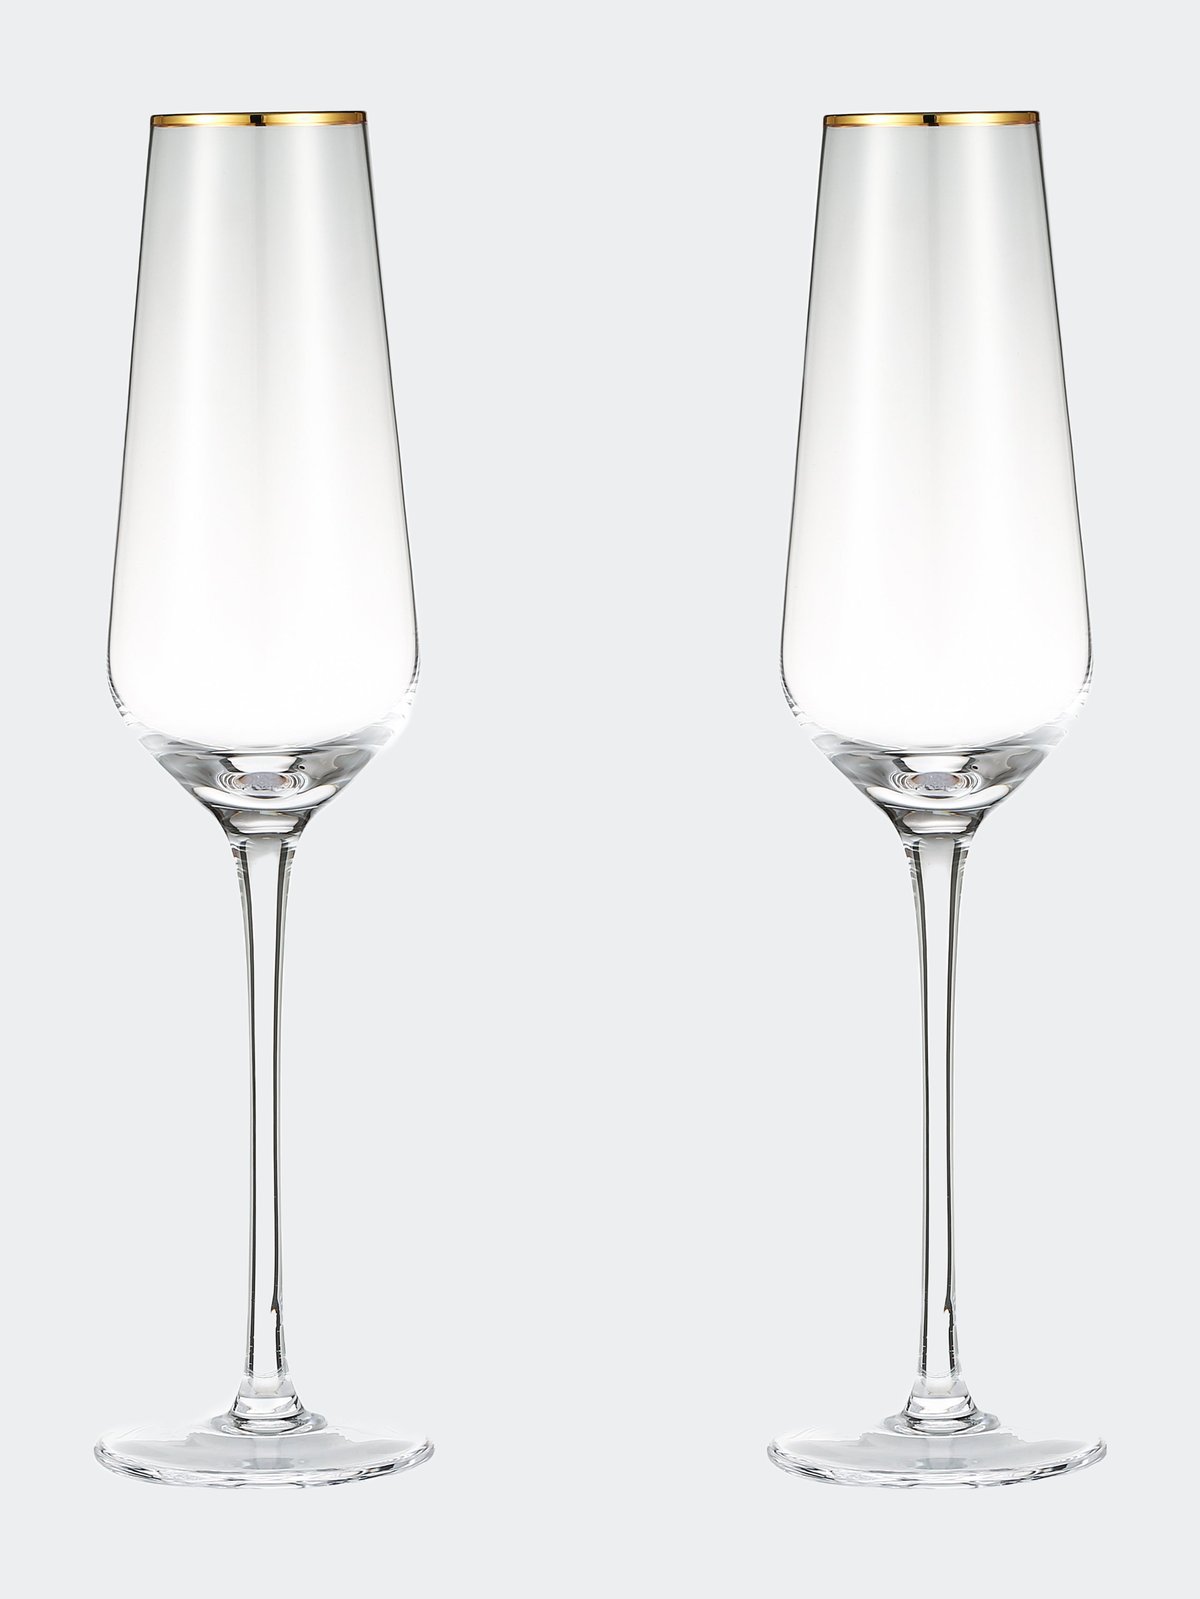 https://images.verishop.com/berkware-champagne-glasses-luxurious-crystal-champagne-toasting-flutes-set-of-4/M00810026171413-1200618984?auto=format&cs=strip&fit=max&w=1200